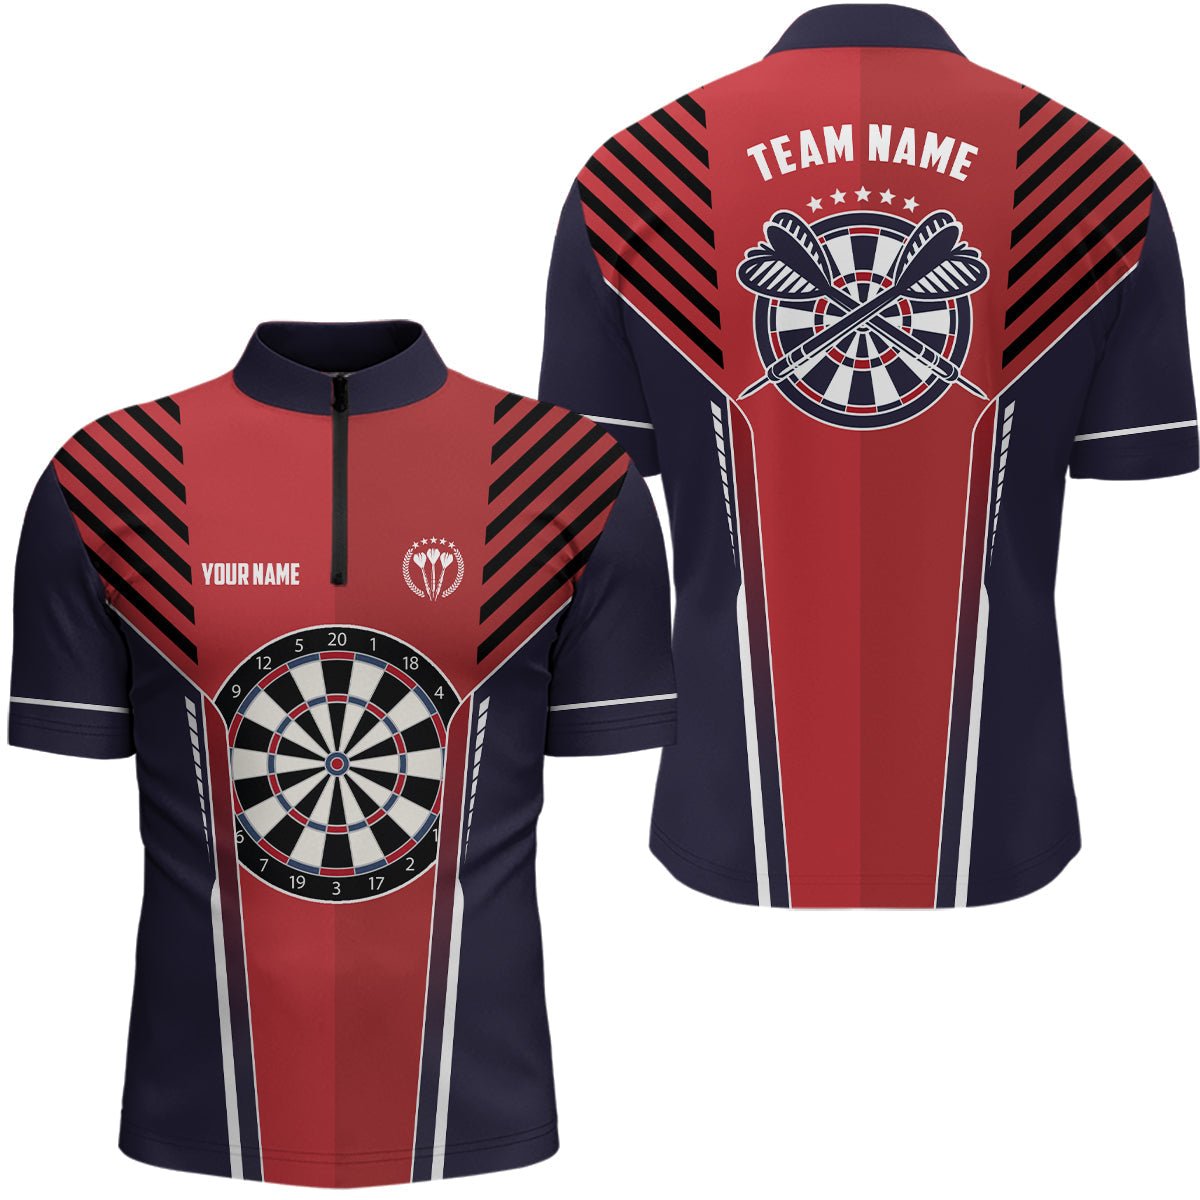 Personalized Strike Red Navy Blue Sporty Darts 1/4 Zip Shirt - Cool Darts Jersey for Men X336